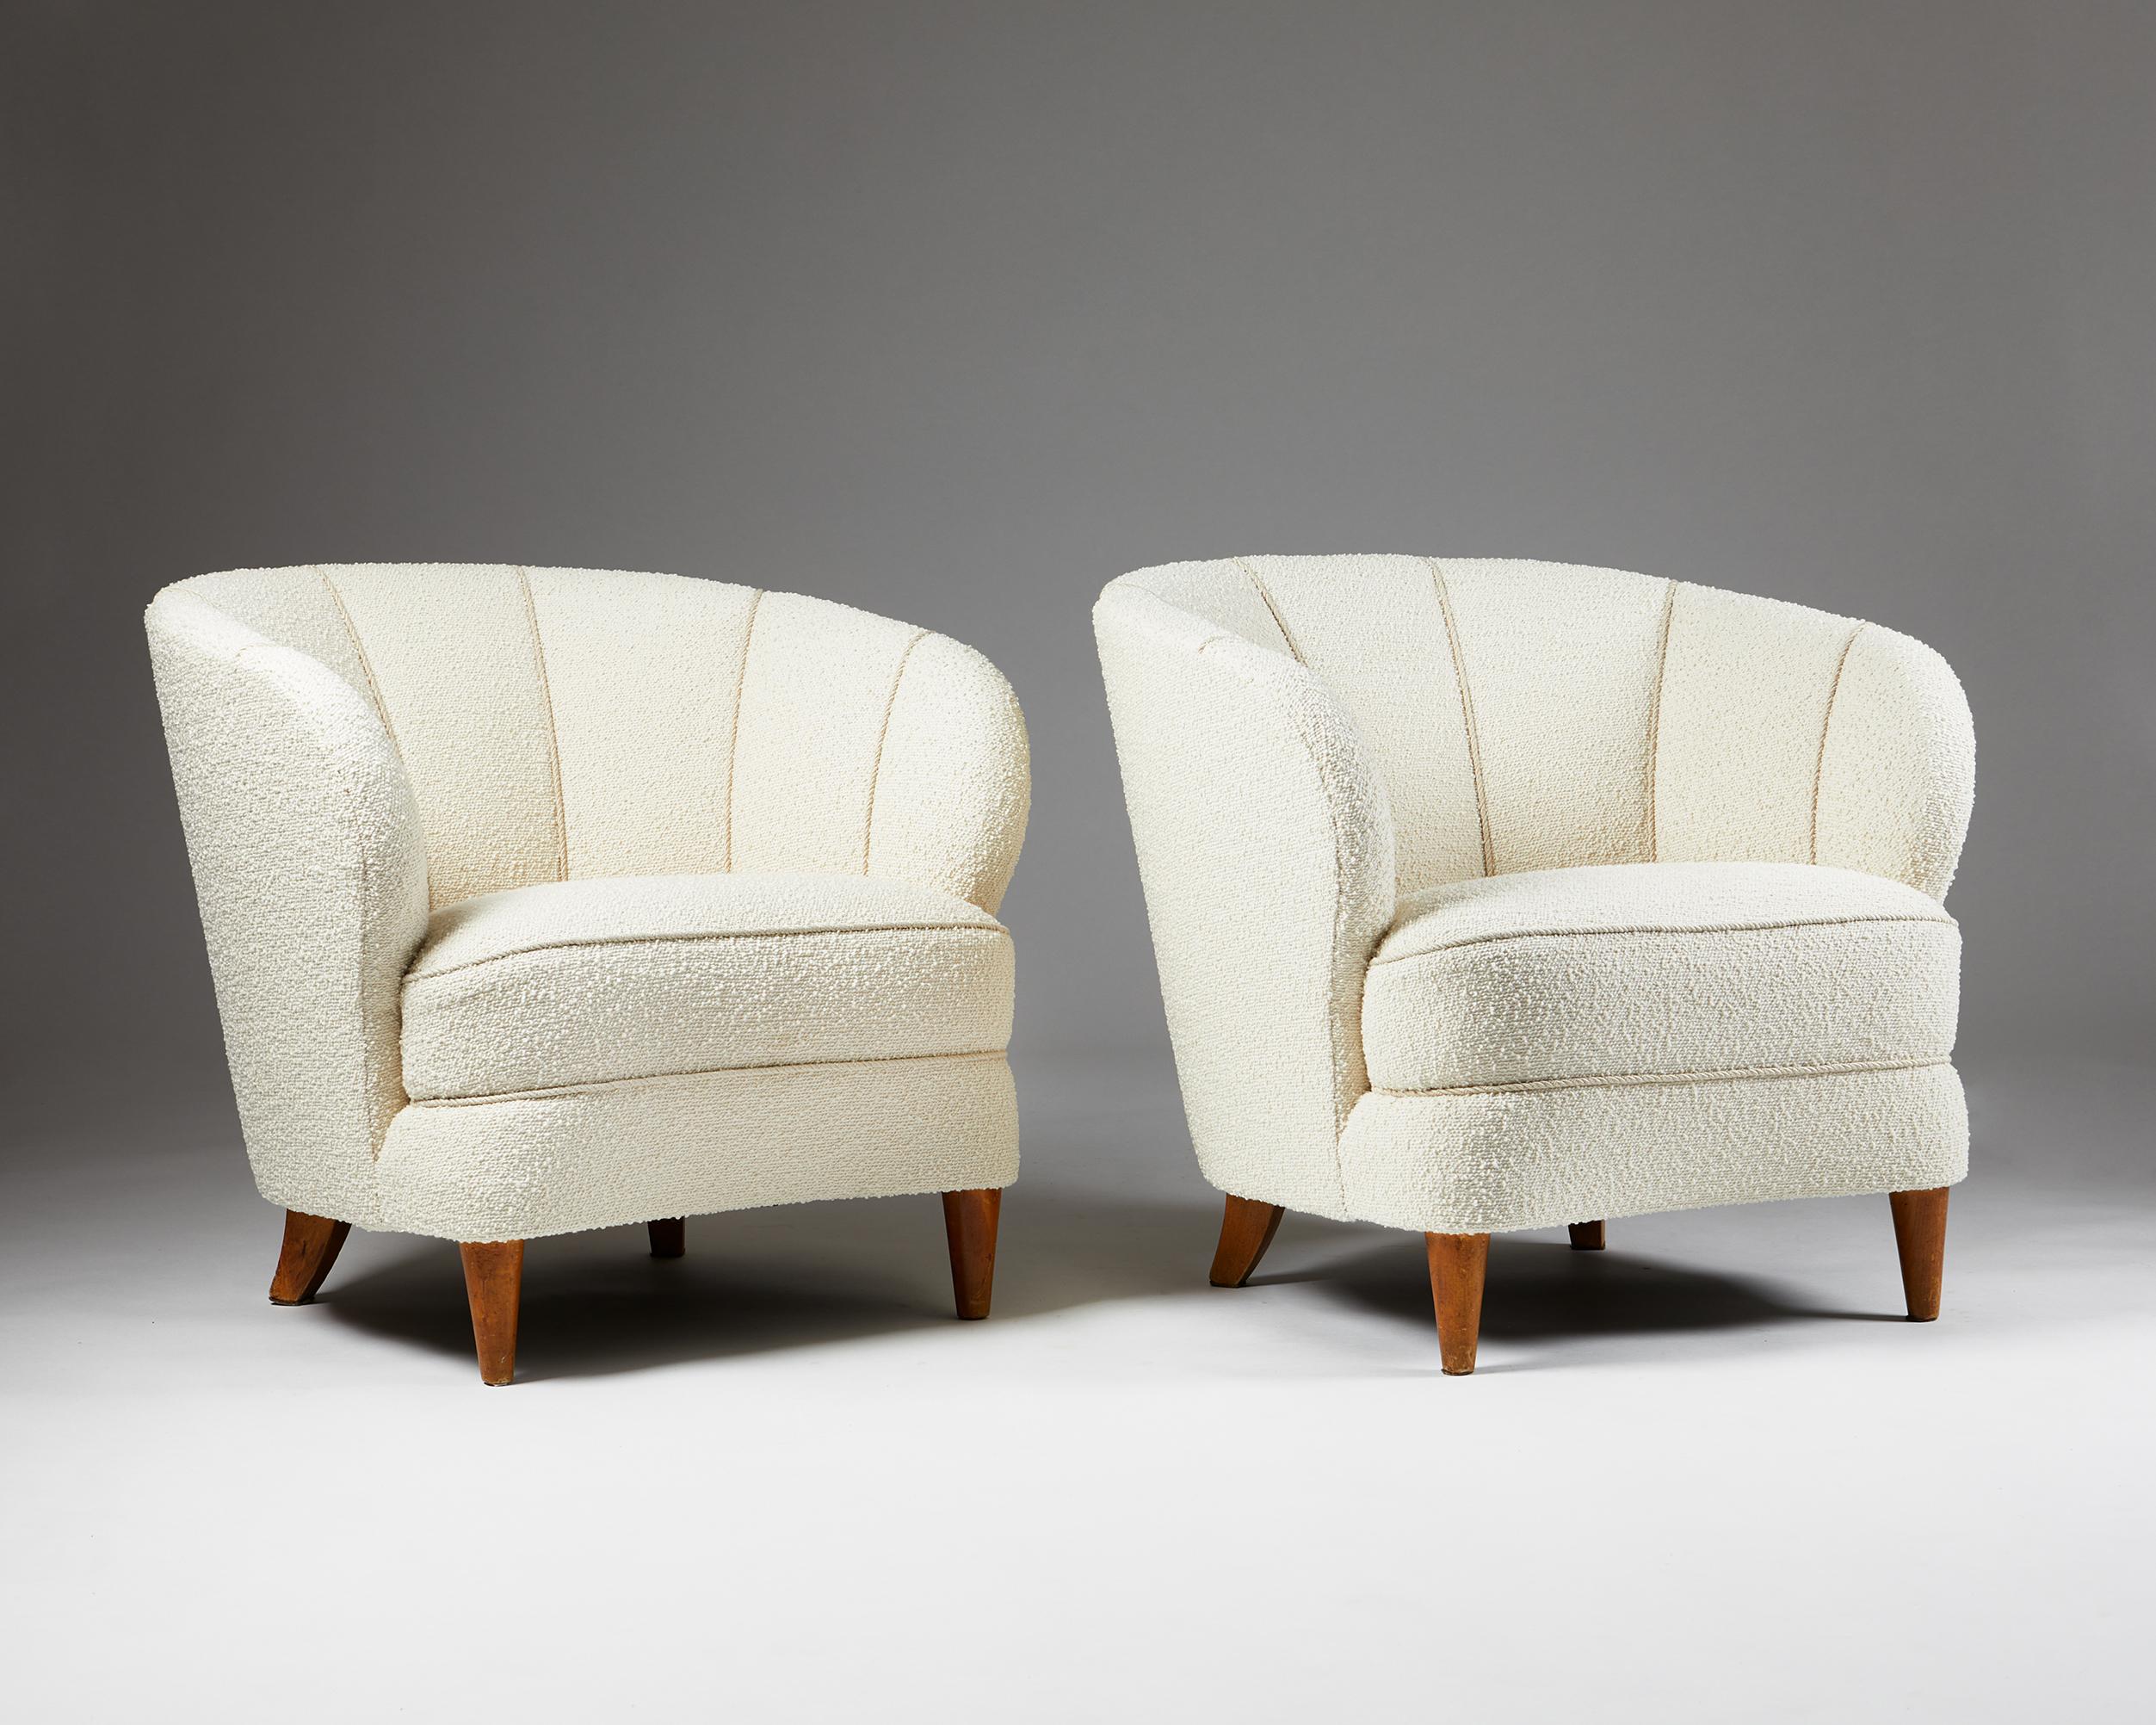 Finnish Pair of Easy Chairs Attributed to Carl-Johan Boman, Finland, 1950s